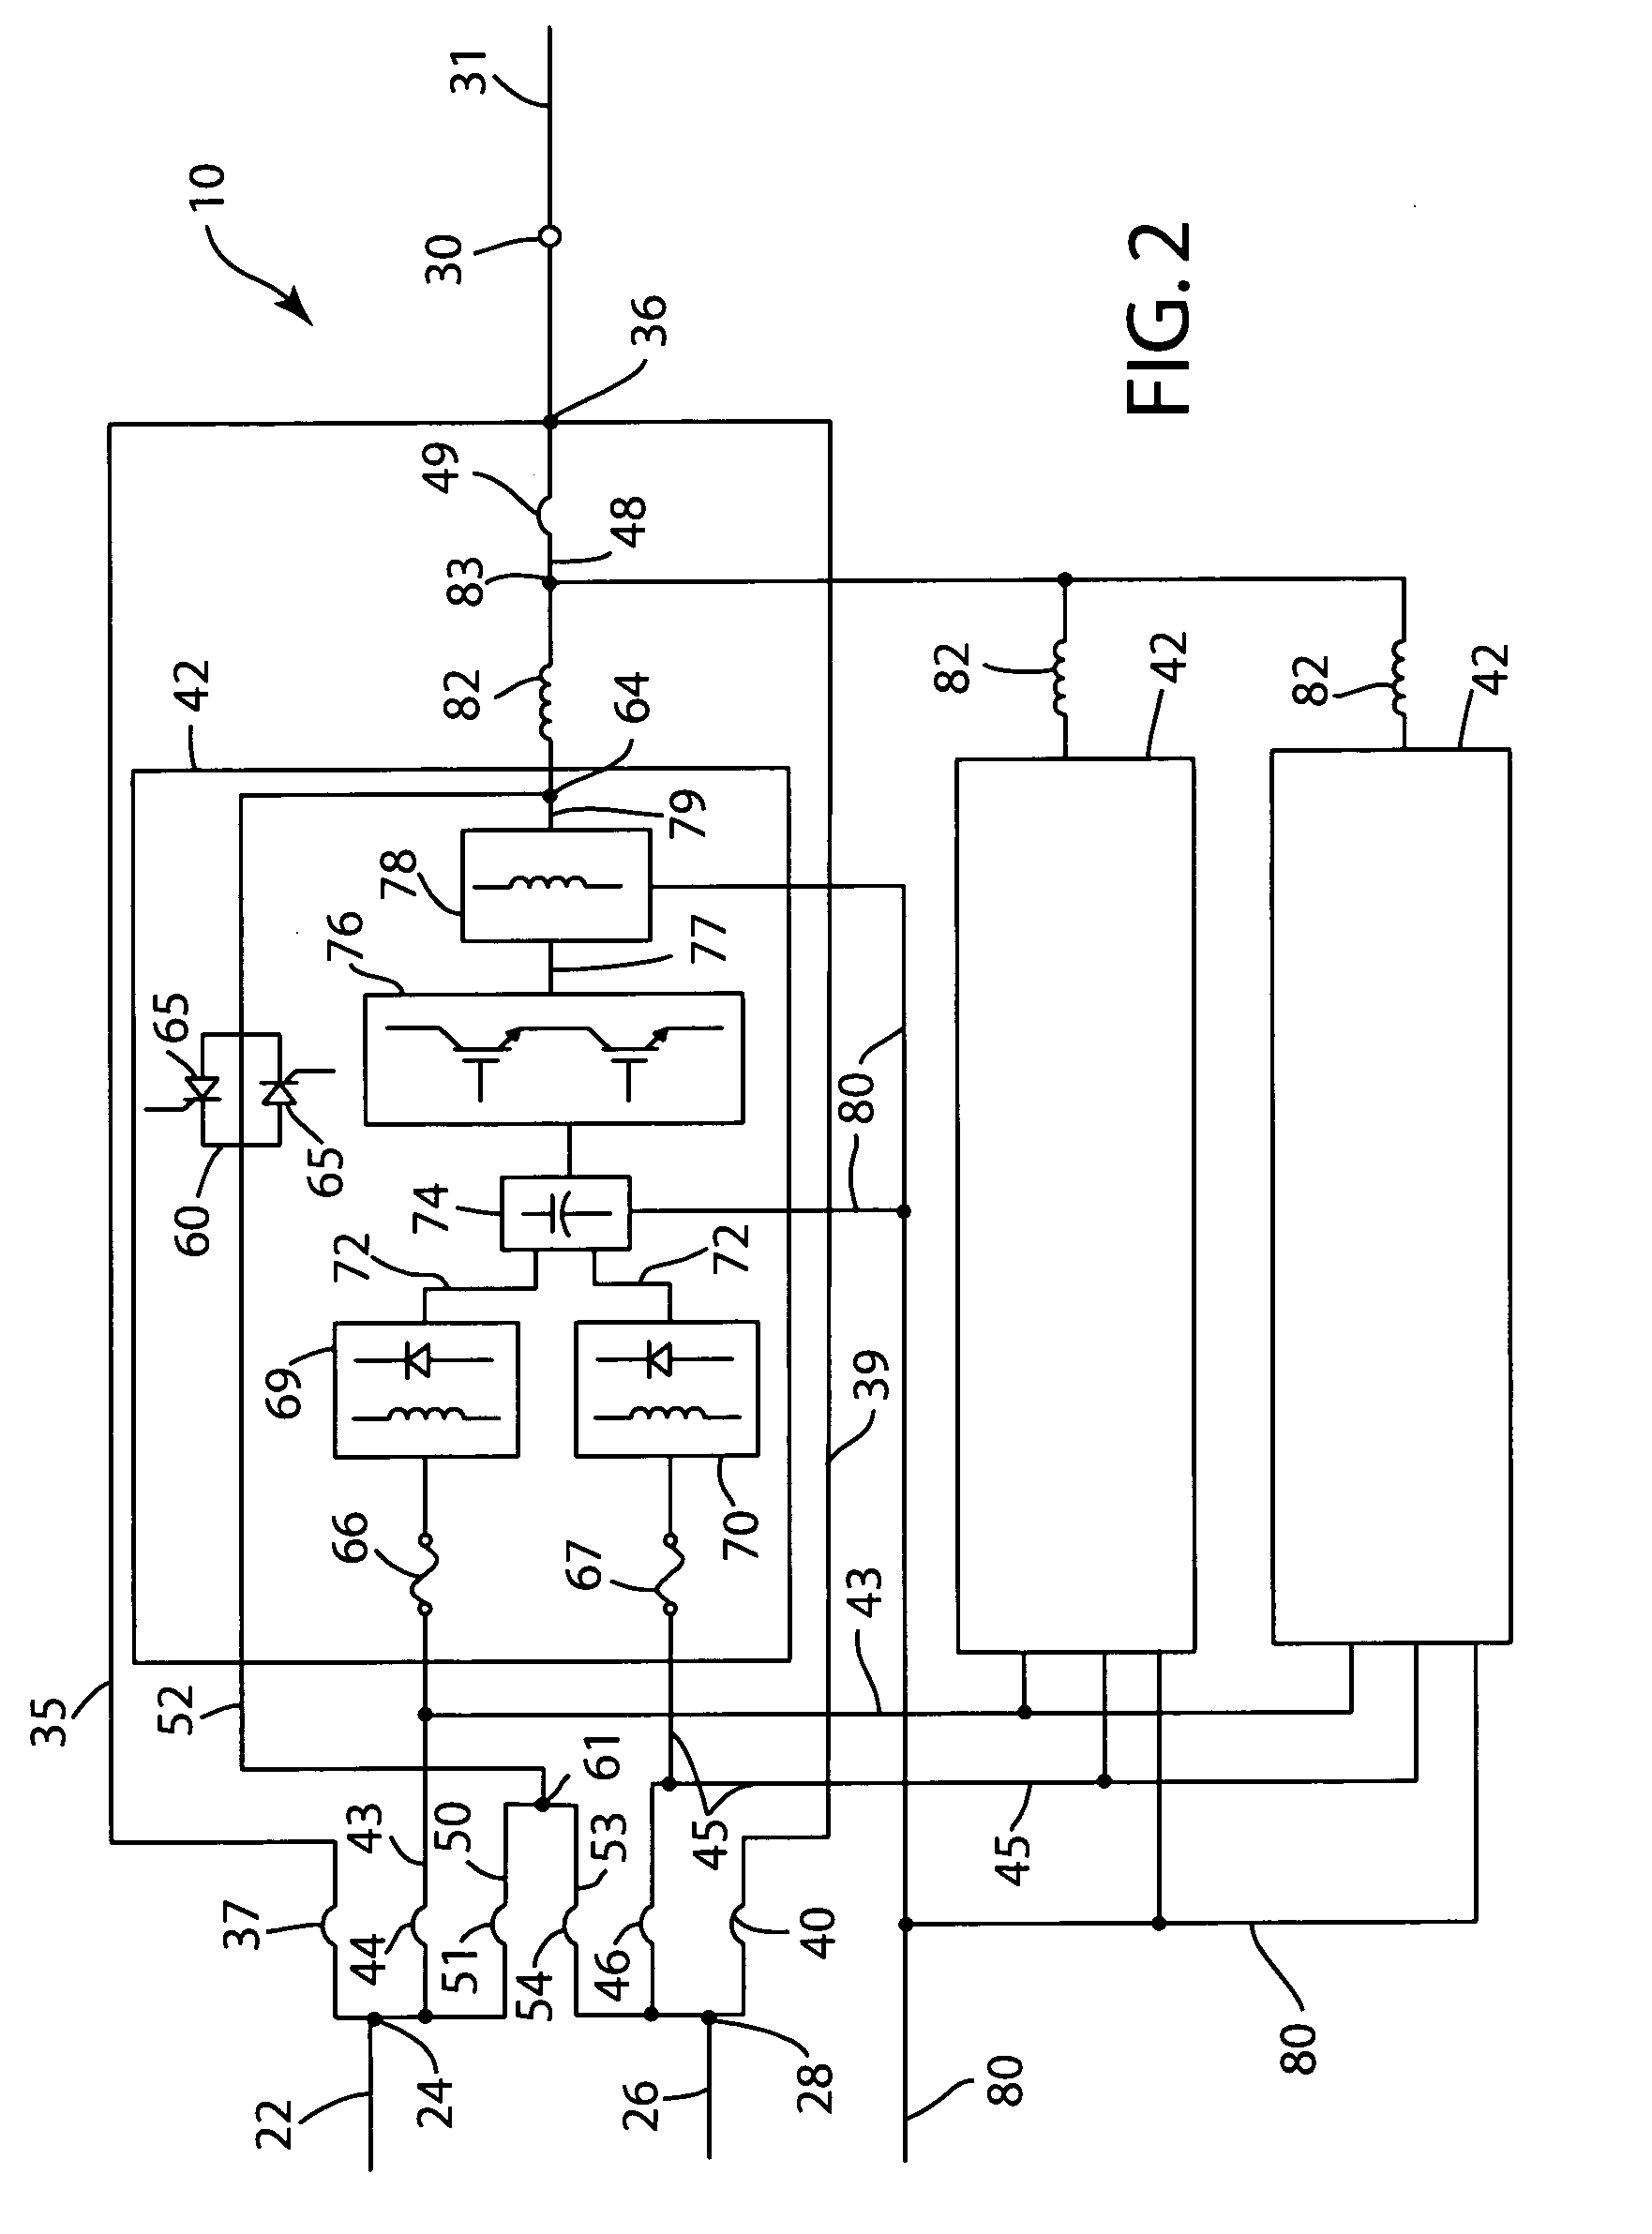 Dual feed power supply systems with enhanced power quality